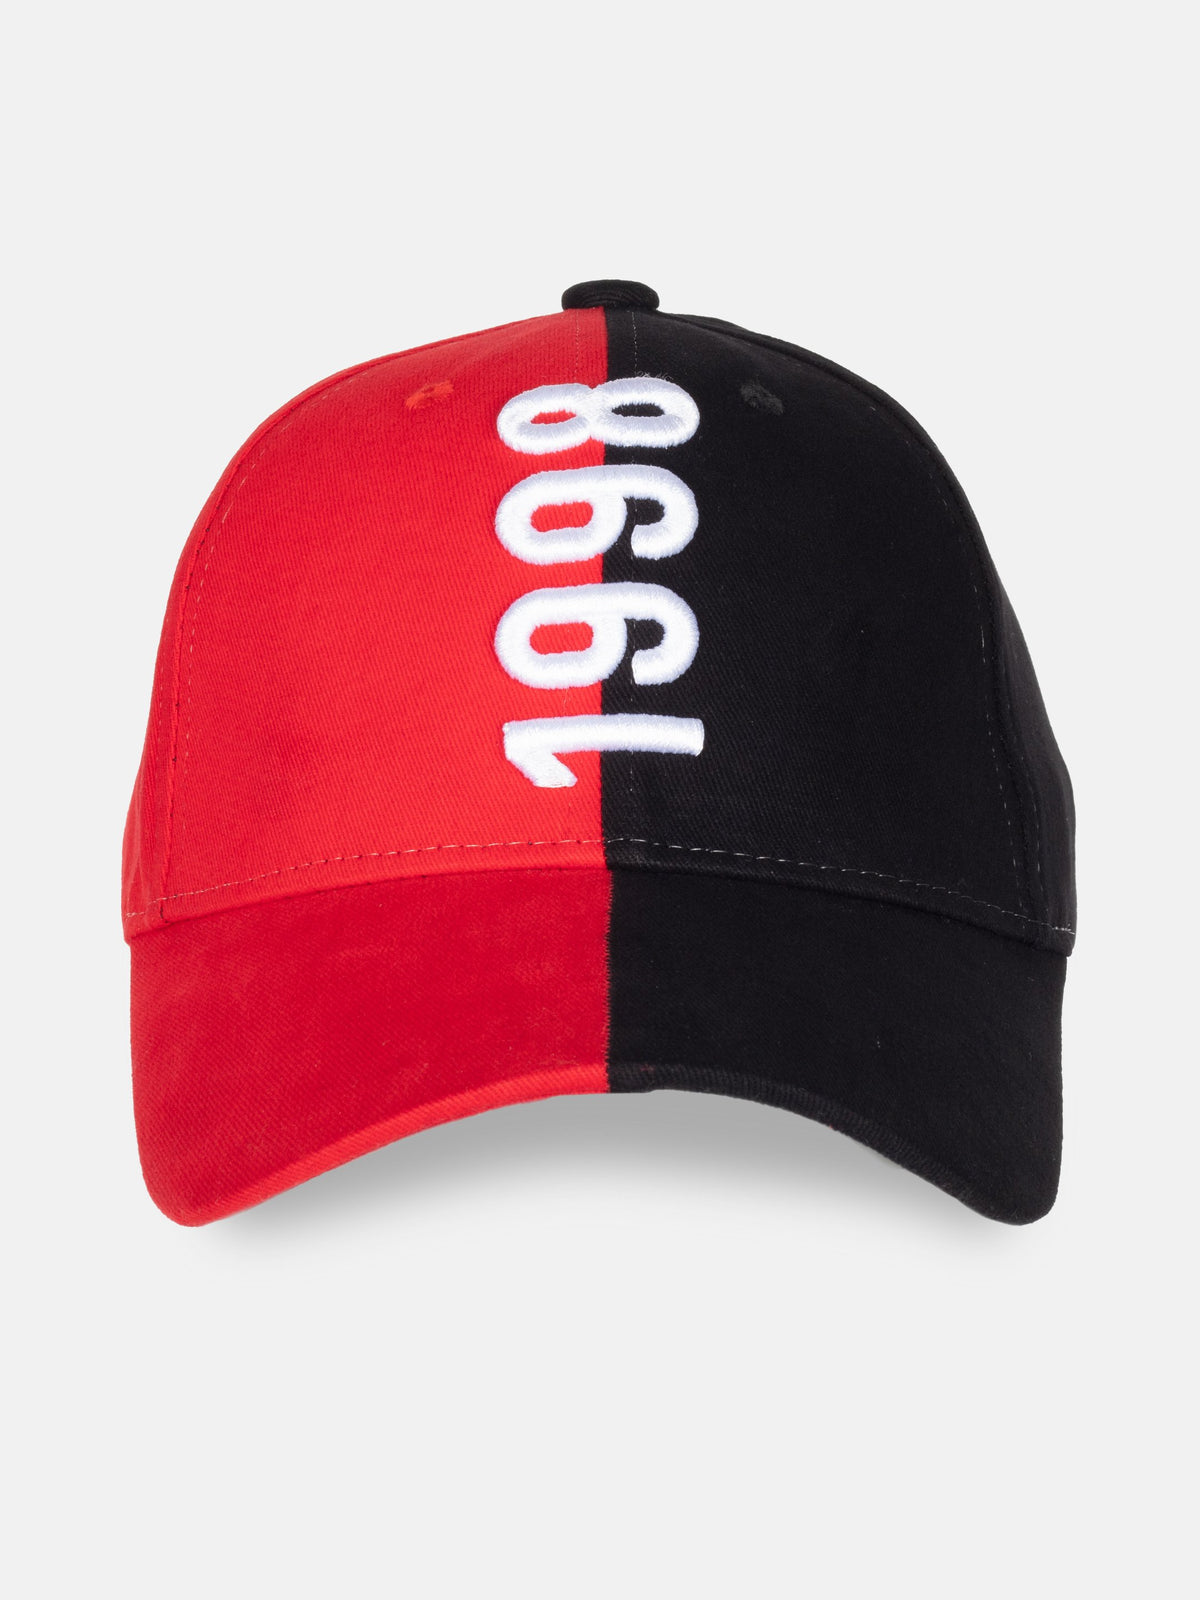 Red/ Black Embroidered Cap